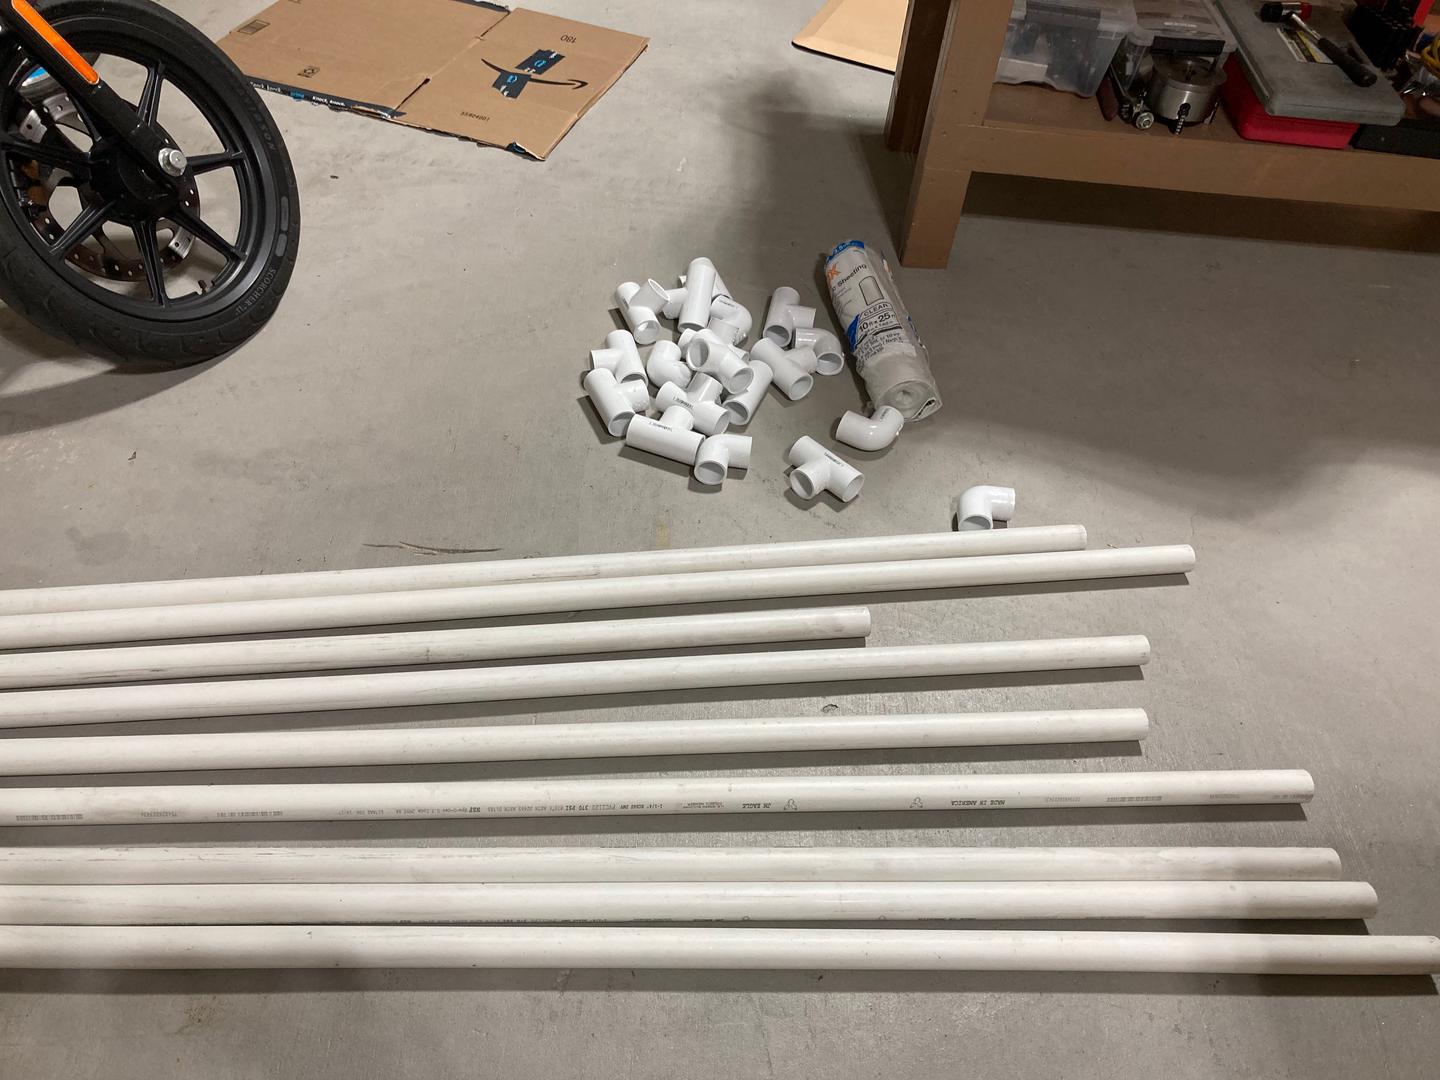 Parts for the paint booth: 9 1-1/4" PVC pipes, 6 right angles and 13 tees.